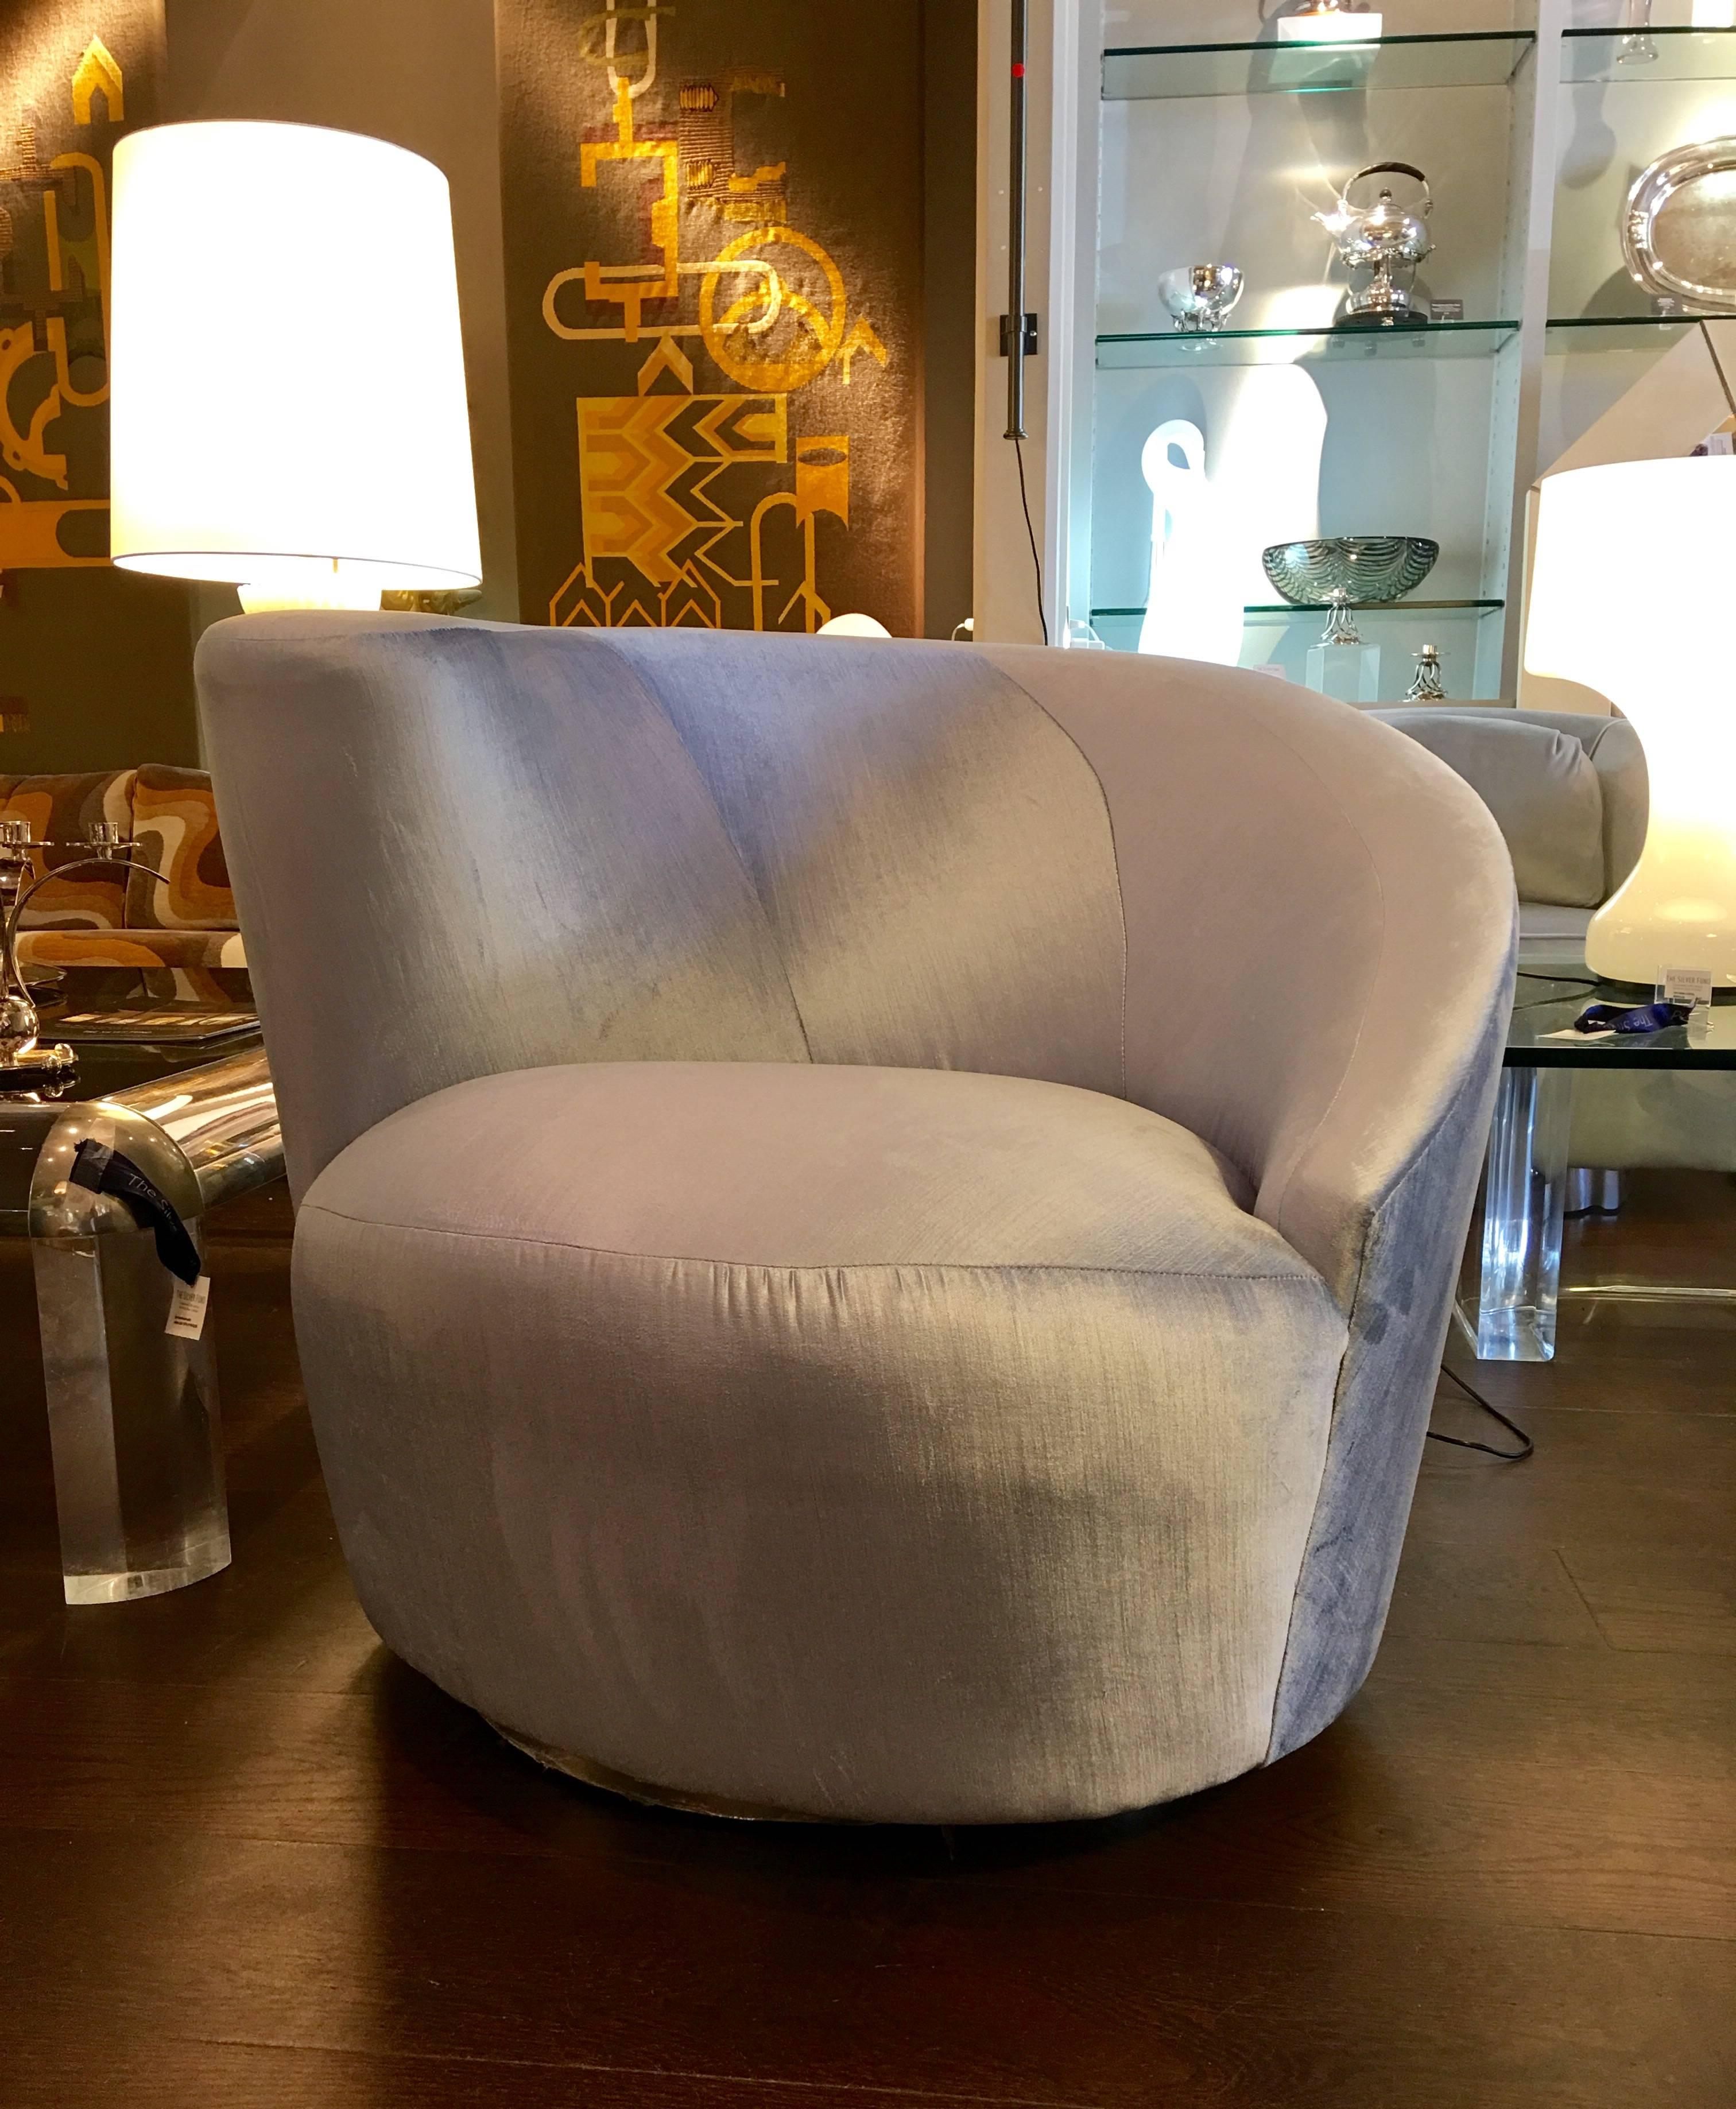 A pair of powder blue ultra-suede Nautilus chairs by Vladimir Kagan. Both chairs have smooth range of motion, as they swivel and return to center position and both have been fully restored with new chrome bases.